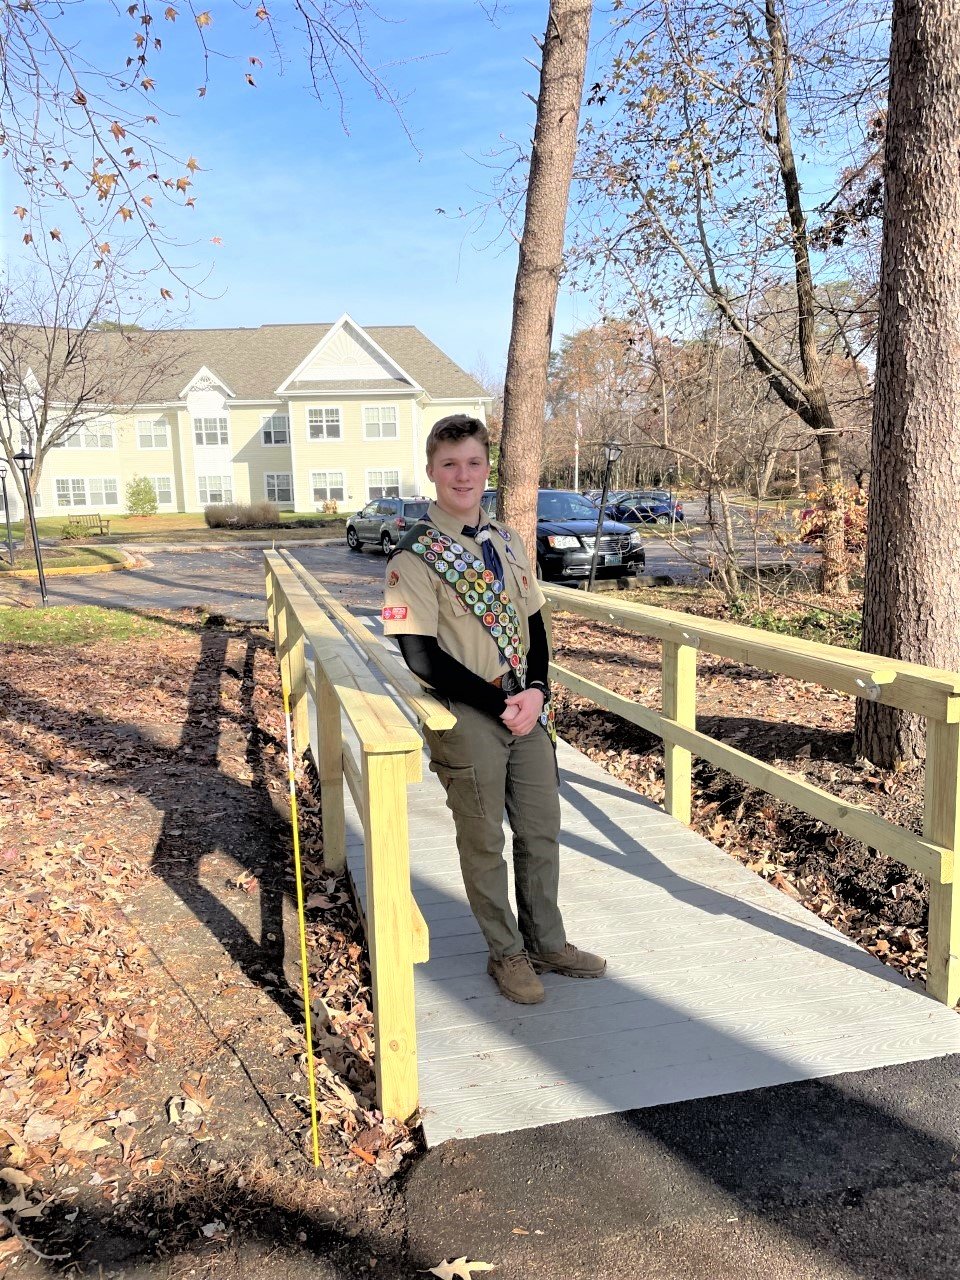 Adam Jackson chose the bridge for his Eagle Scout project because his family attends services at Woods Church, and he has had grandparents live in Sunrise’s independent and assisted living units.